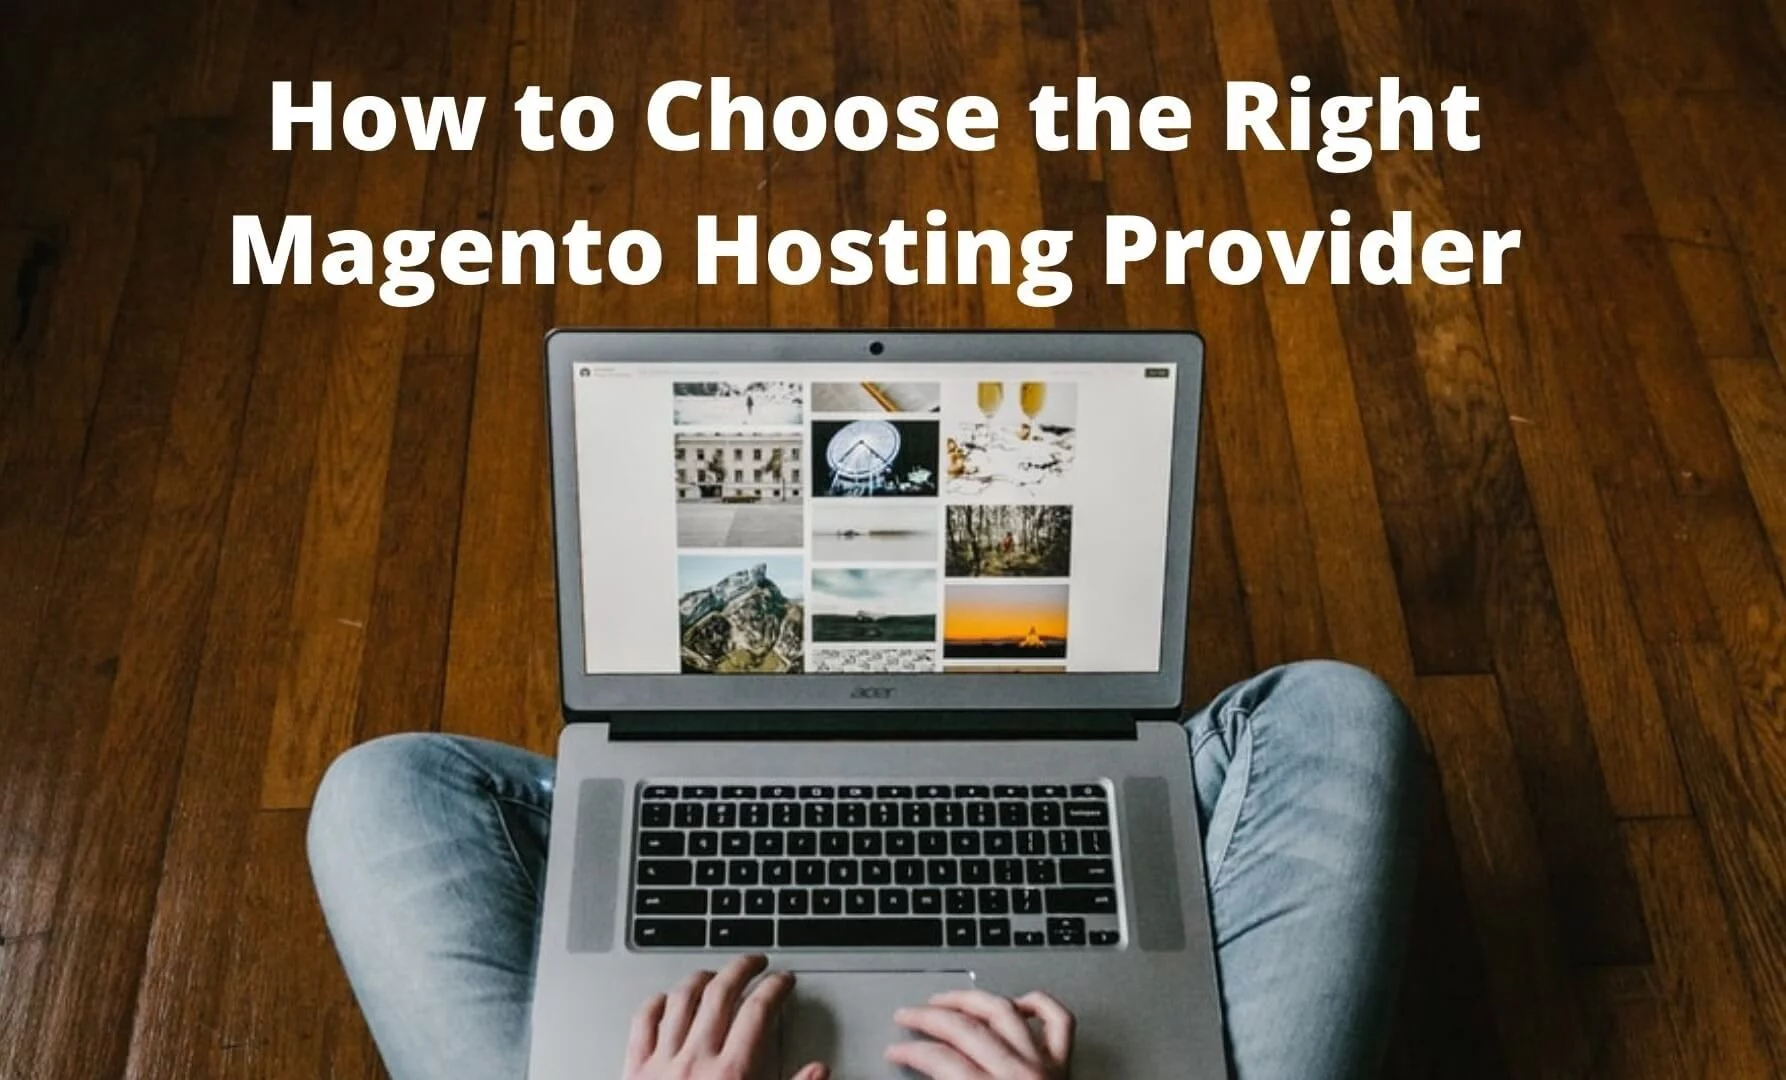 How-to-Choose-the-Right-Magento-Hosting-Provider-1